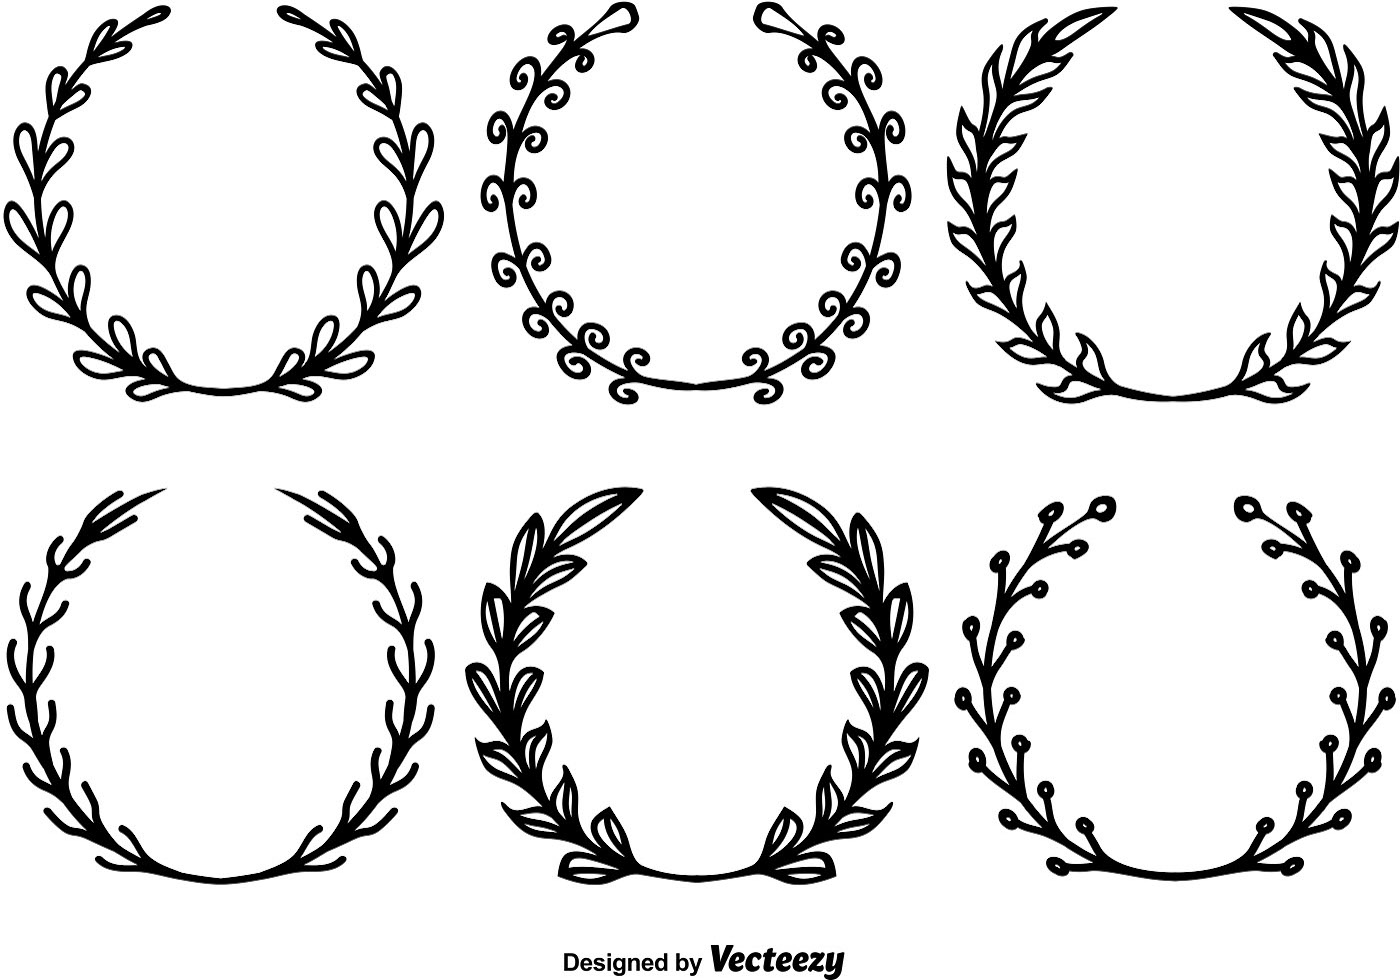 Download Hand Drawn Wreath Vectors for free.